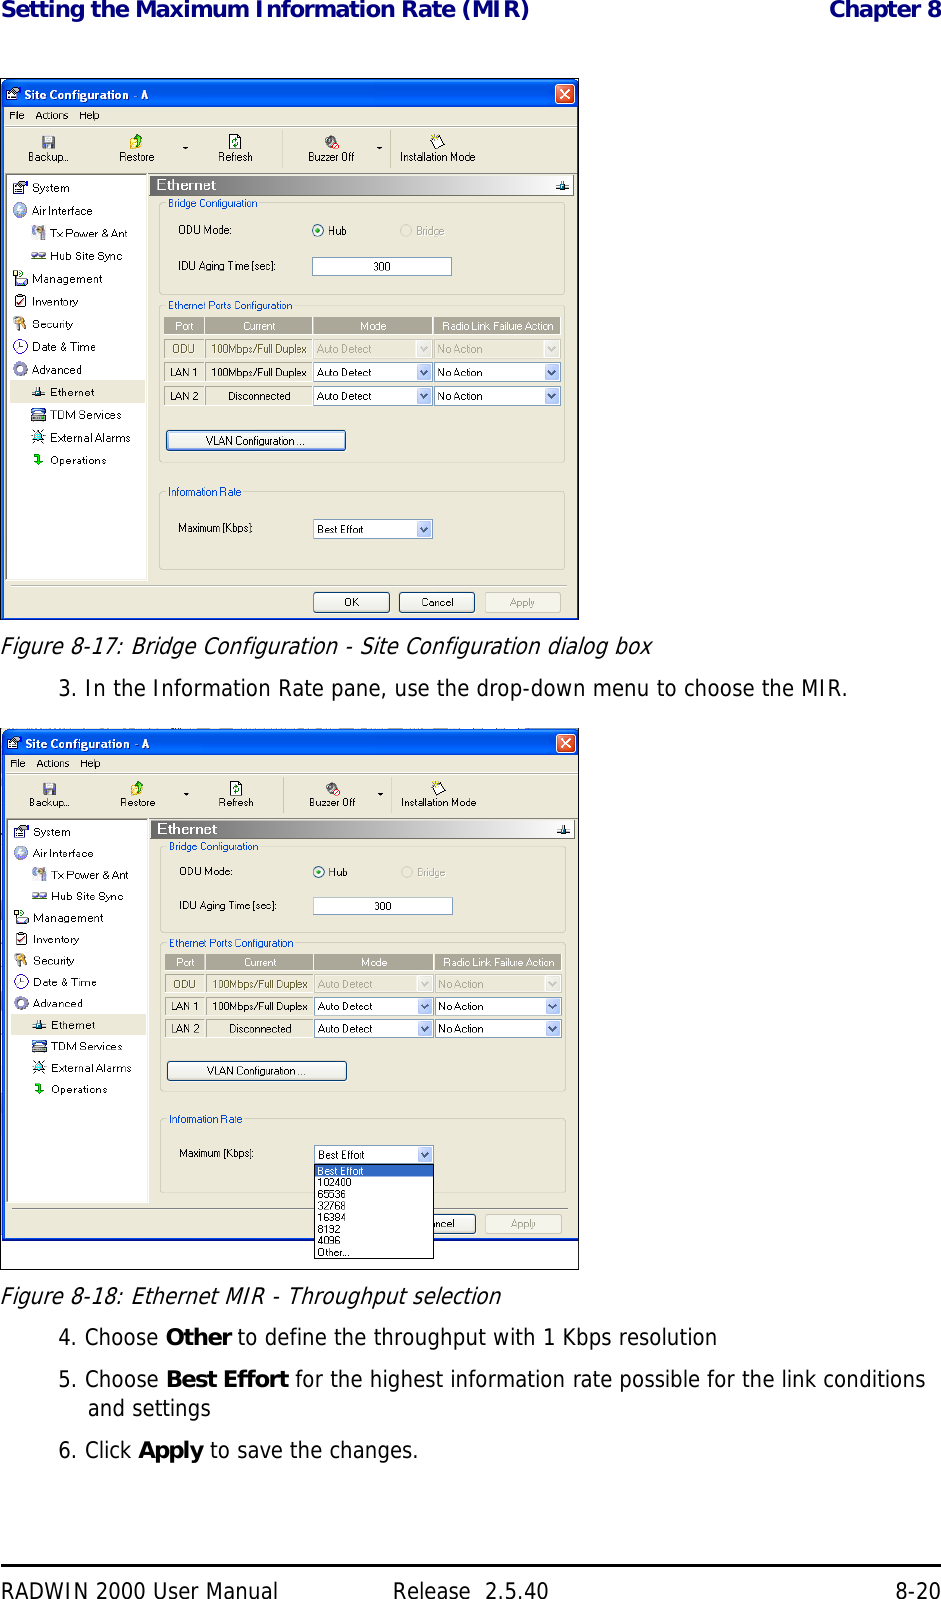 Setting the Maximum Information Rate (MIR) Chapter 8RADWIN 2000 User Manual Release  2.5.40 8-20Figure 8-17: Bridge Configuration - Site Configuration dialog box3. In the Information Rate pane, use the drop-down menu to choose the MIR.Figure 8-18: Ethernet MIR - Throughput selection4. Choose Other to define the throughput with 1 Kbps resolution5. Choose Best Effort for the highest information rate possible for the link conditions and settings6. Click Apply to save the changes.